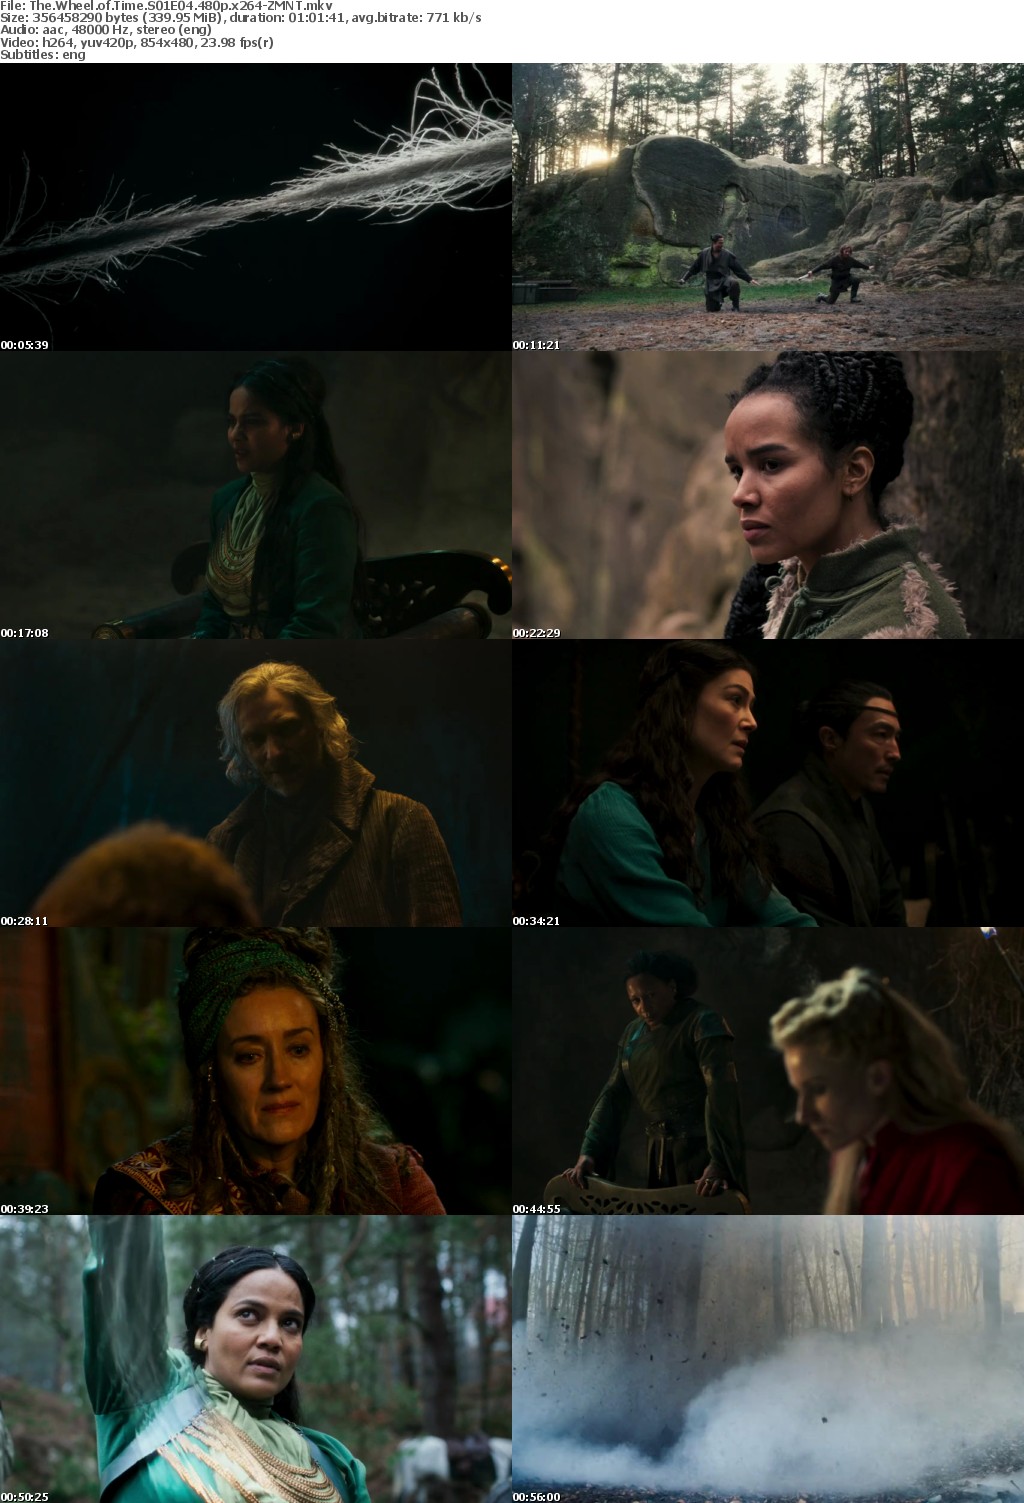 The Wheel of Time S01E04 480p x264-ZMNT